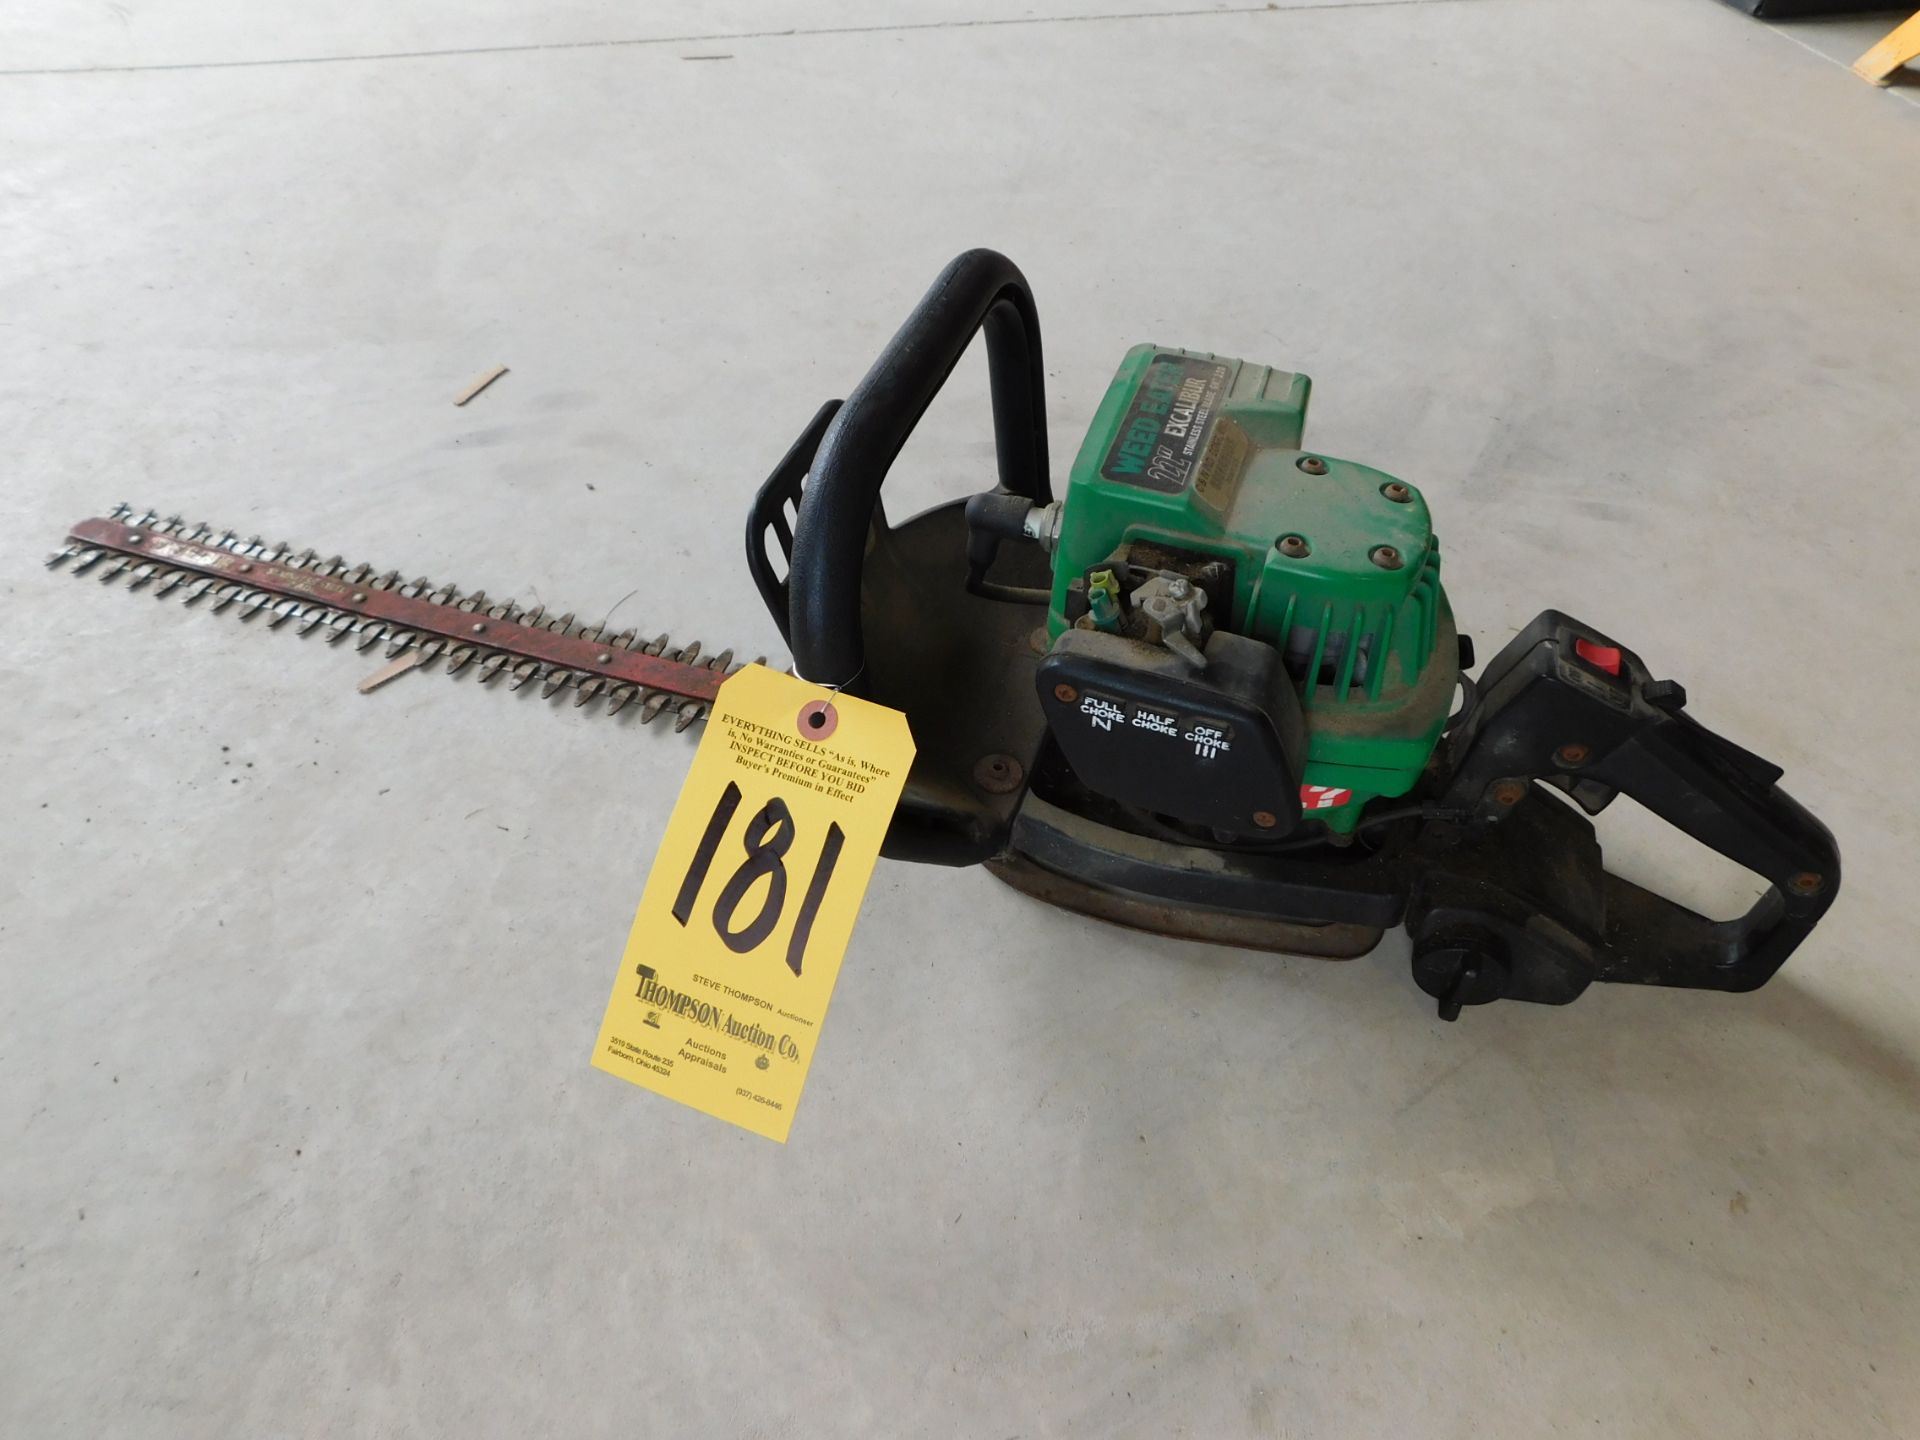 Weed Eater 22" Gas Powered Hedge Trimmer